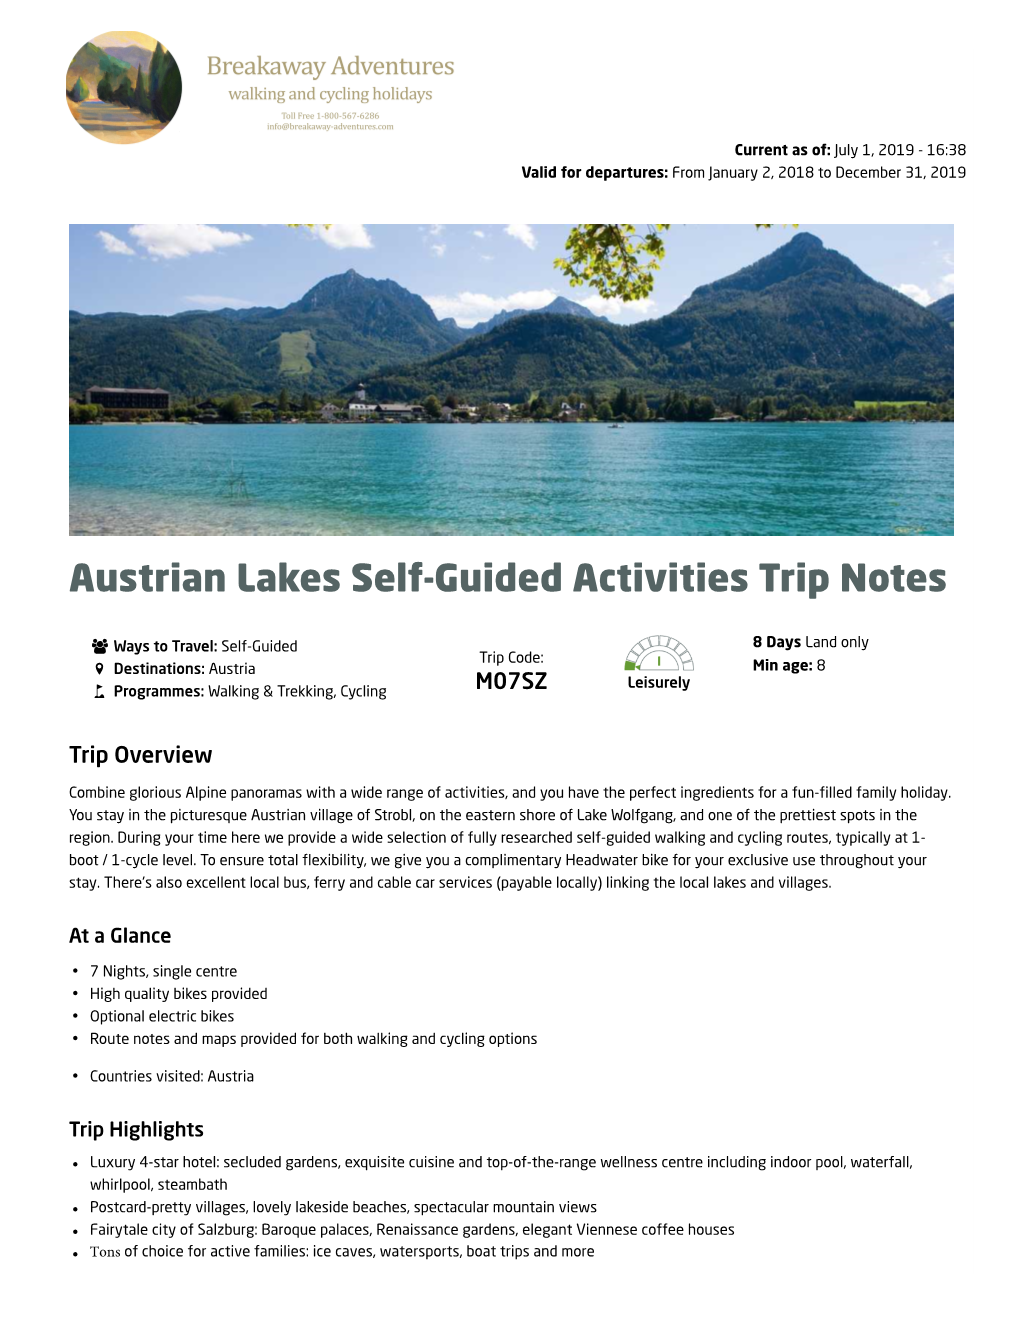 Austrian Lakes Self-Guided Activities Trip Notes